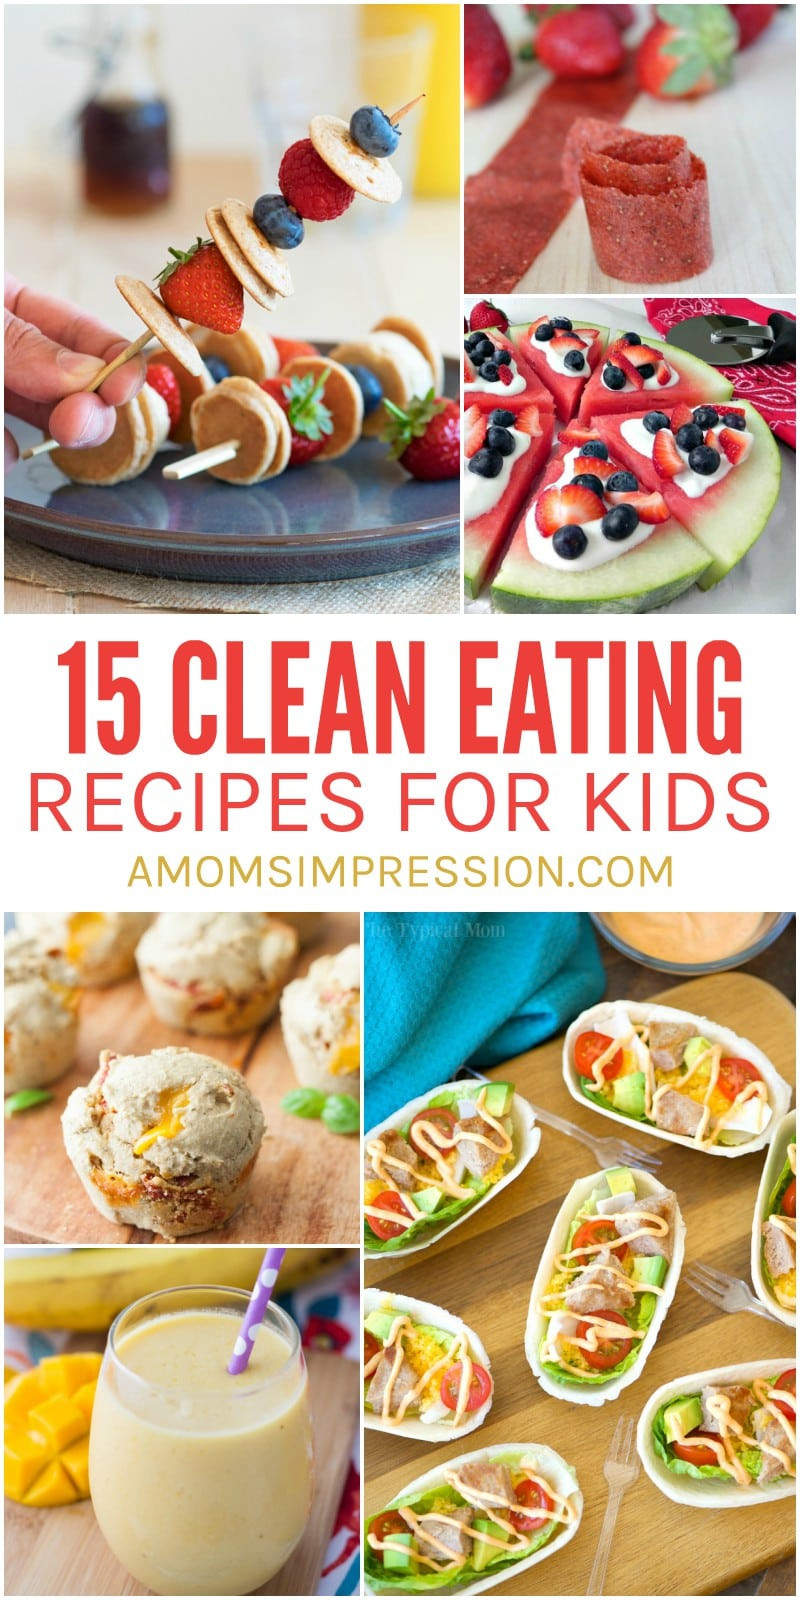 Clean Eating For Kids
 Kid Friendly Food 15 Clean Eating Recipes for Kids